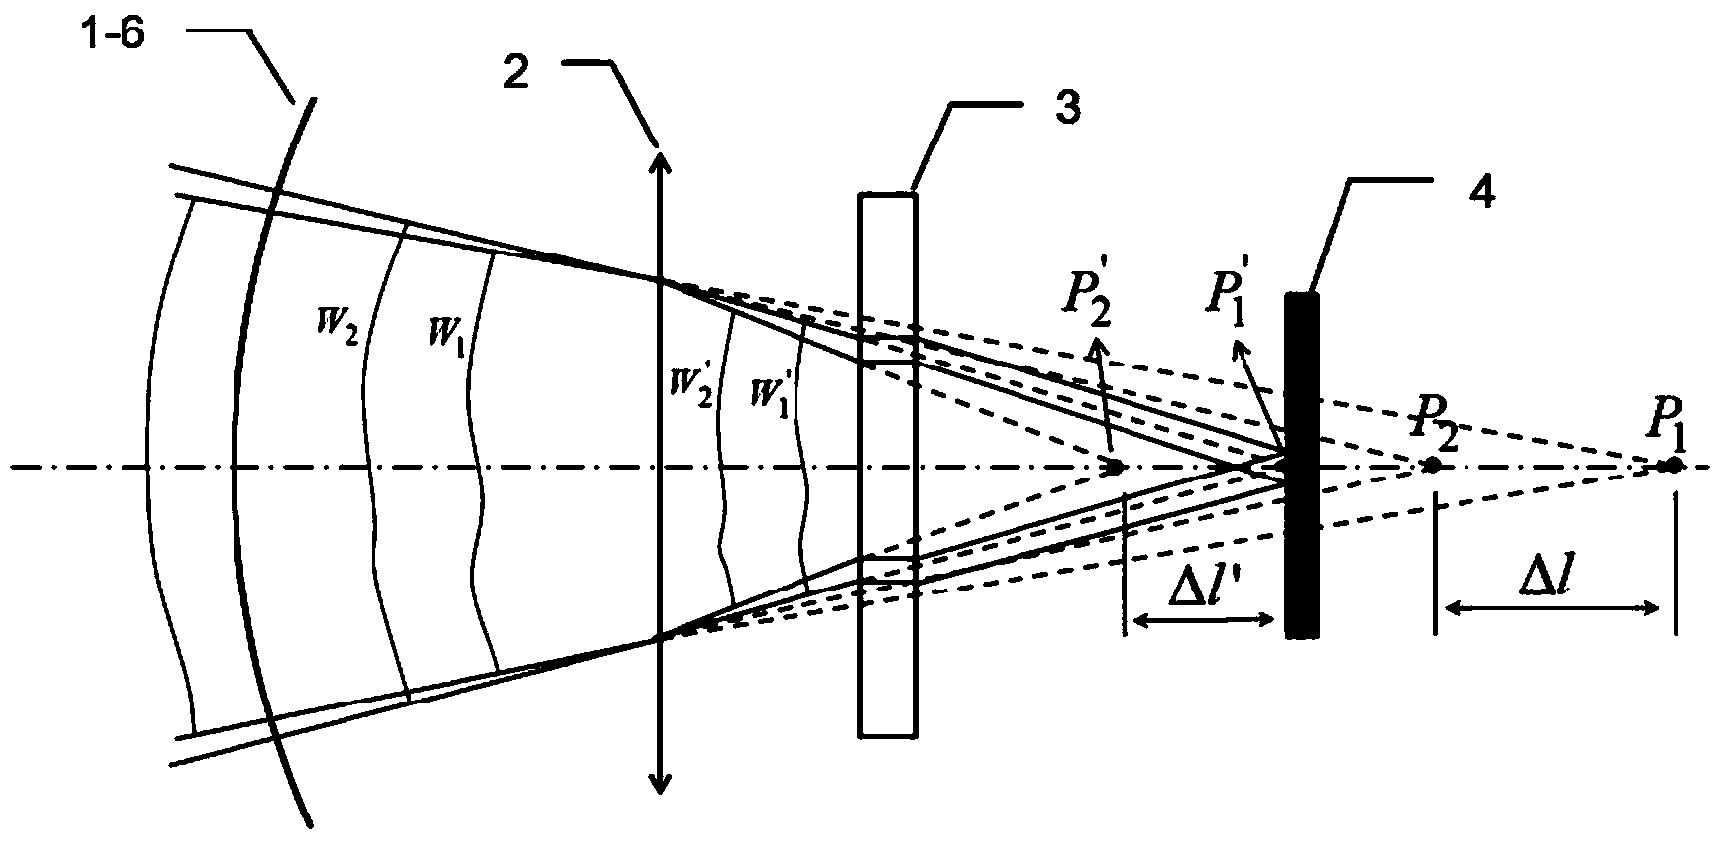 Lens focal length measuring device and method based on Fizeau interferomenter